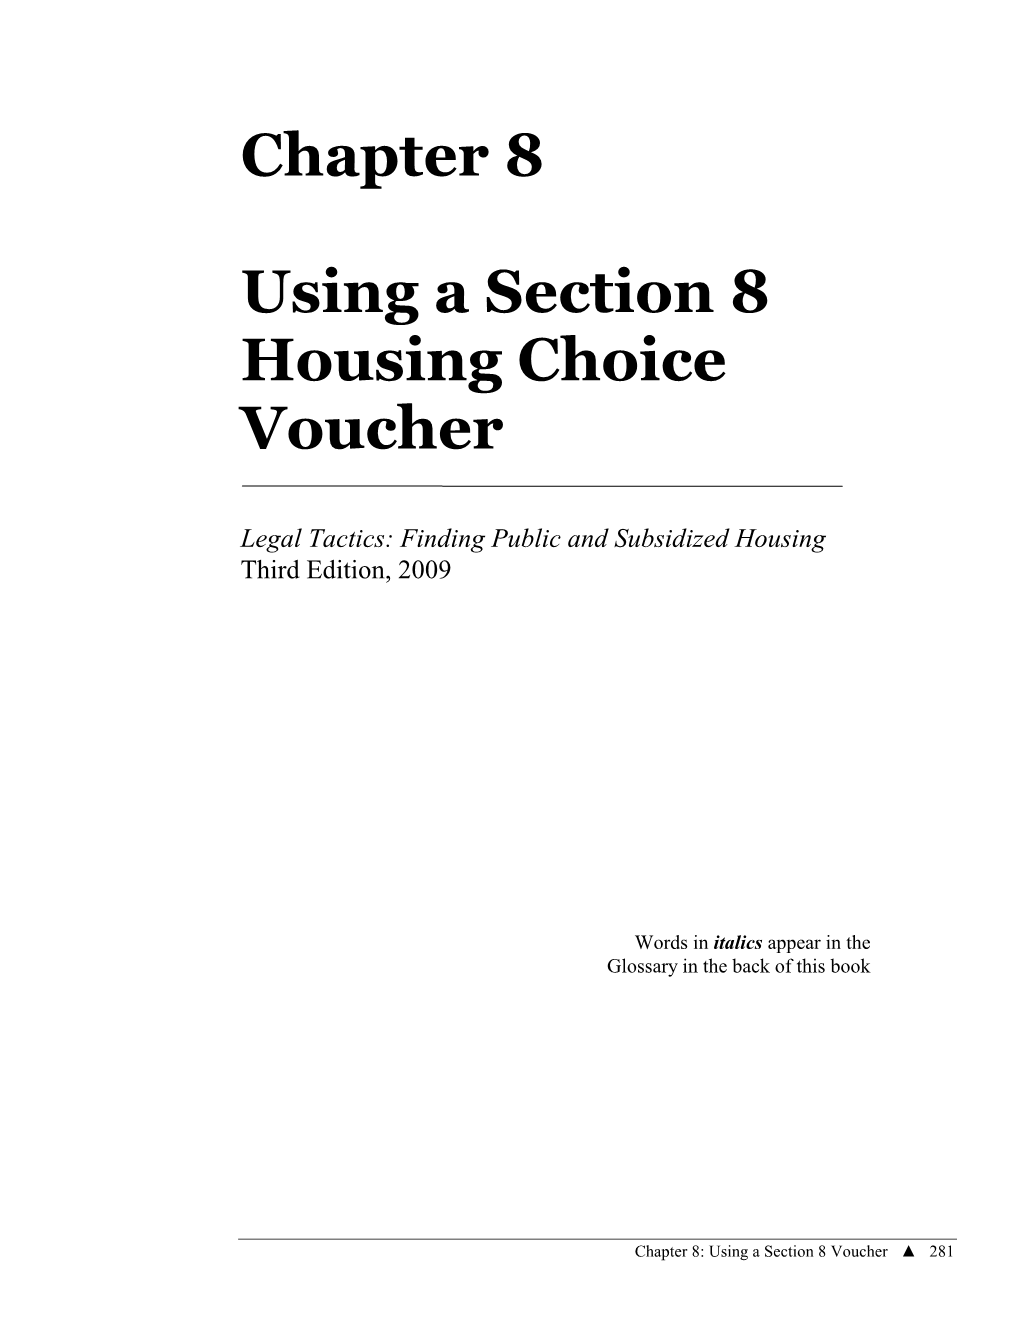 Using a Section 8 Voucher ▲ 281 282 ▲ Chapter 8: Using a Section 8 Voucher Table of Contents Getting the Voucher